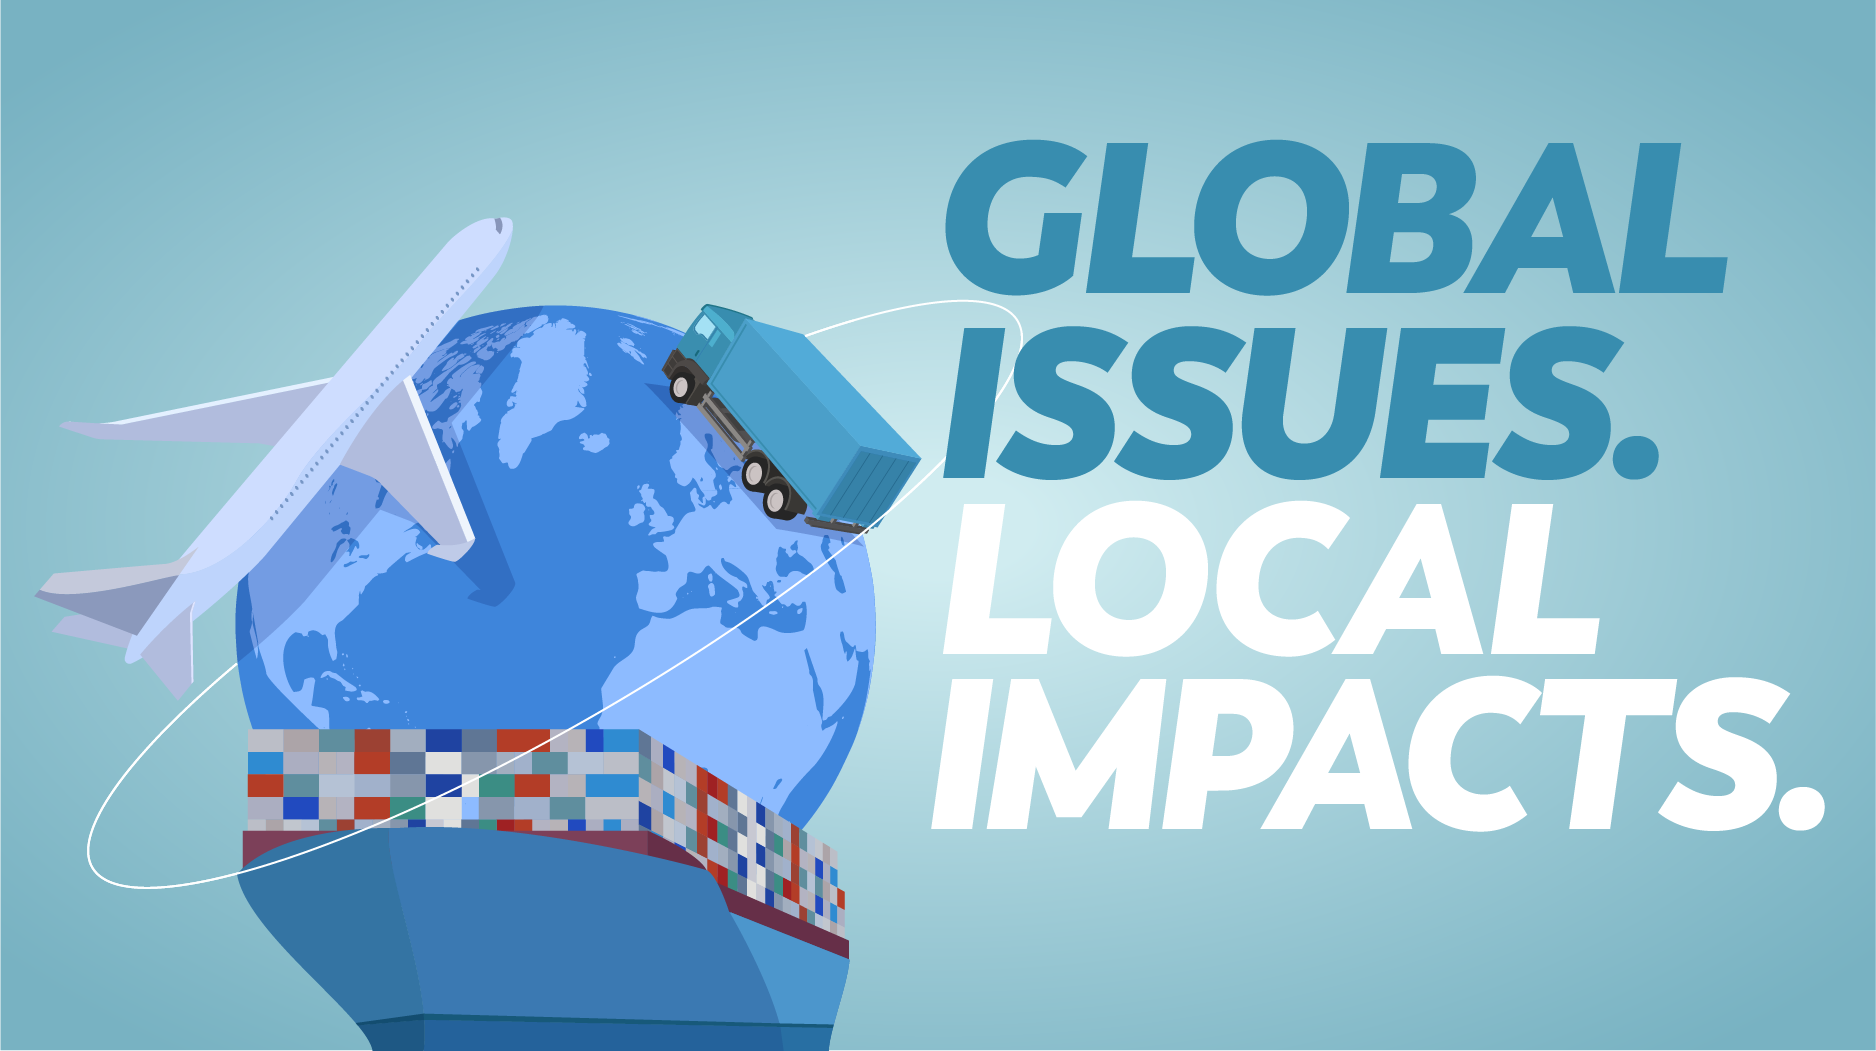 GLOBAL ISSUES. LOCAL IMPACTS.